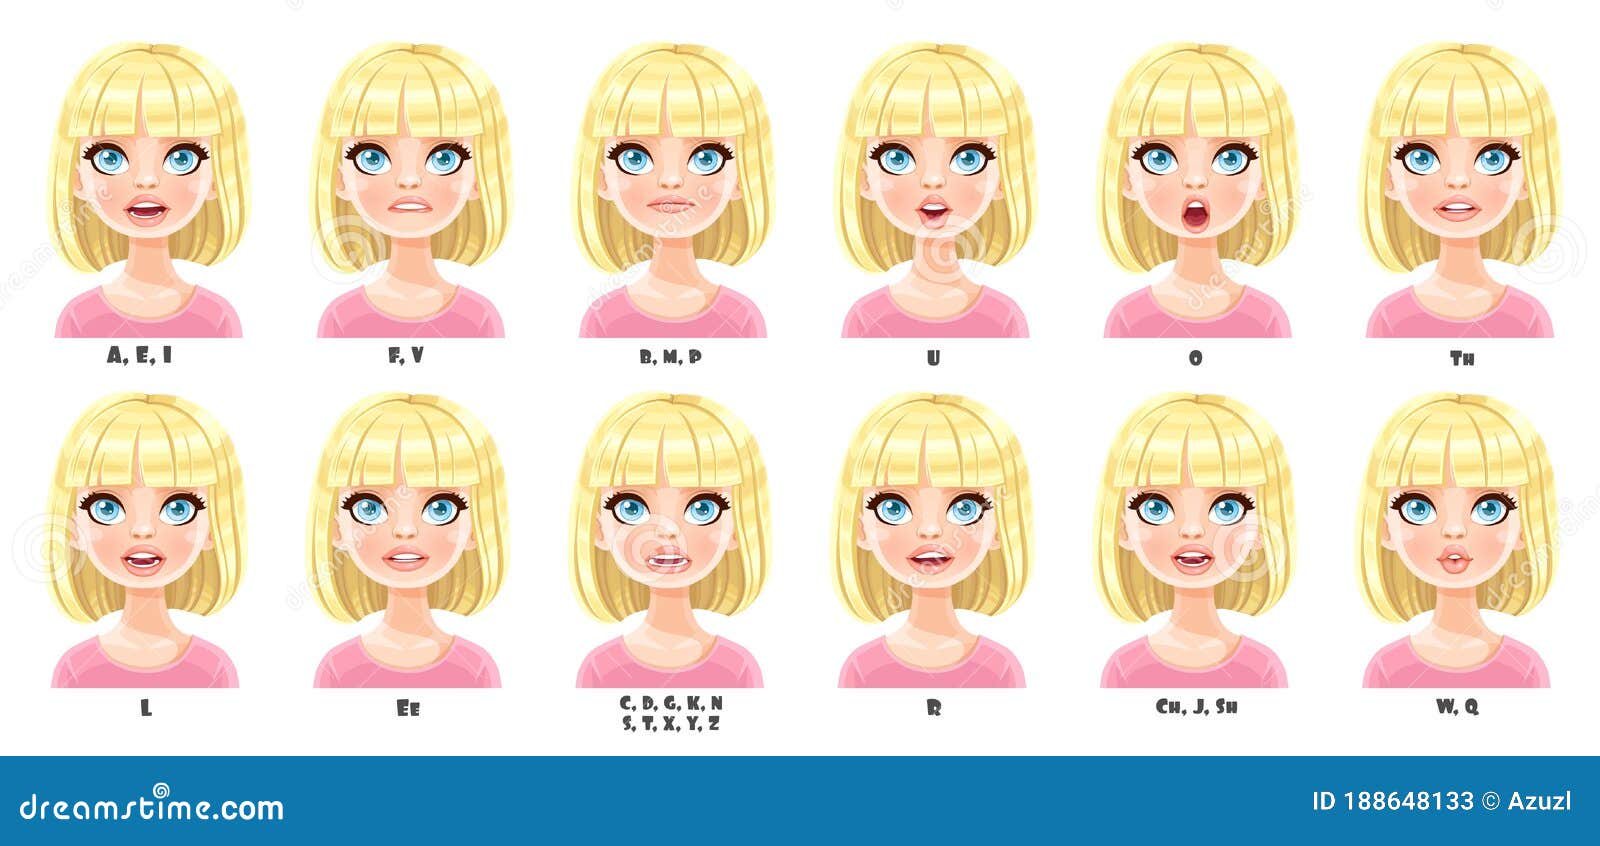 10+ Girl Cartoon Characters With Short Blonde Hair